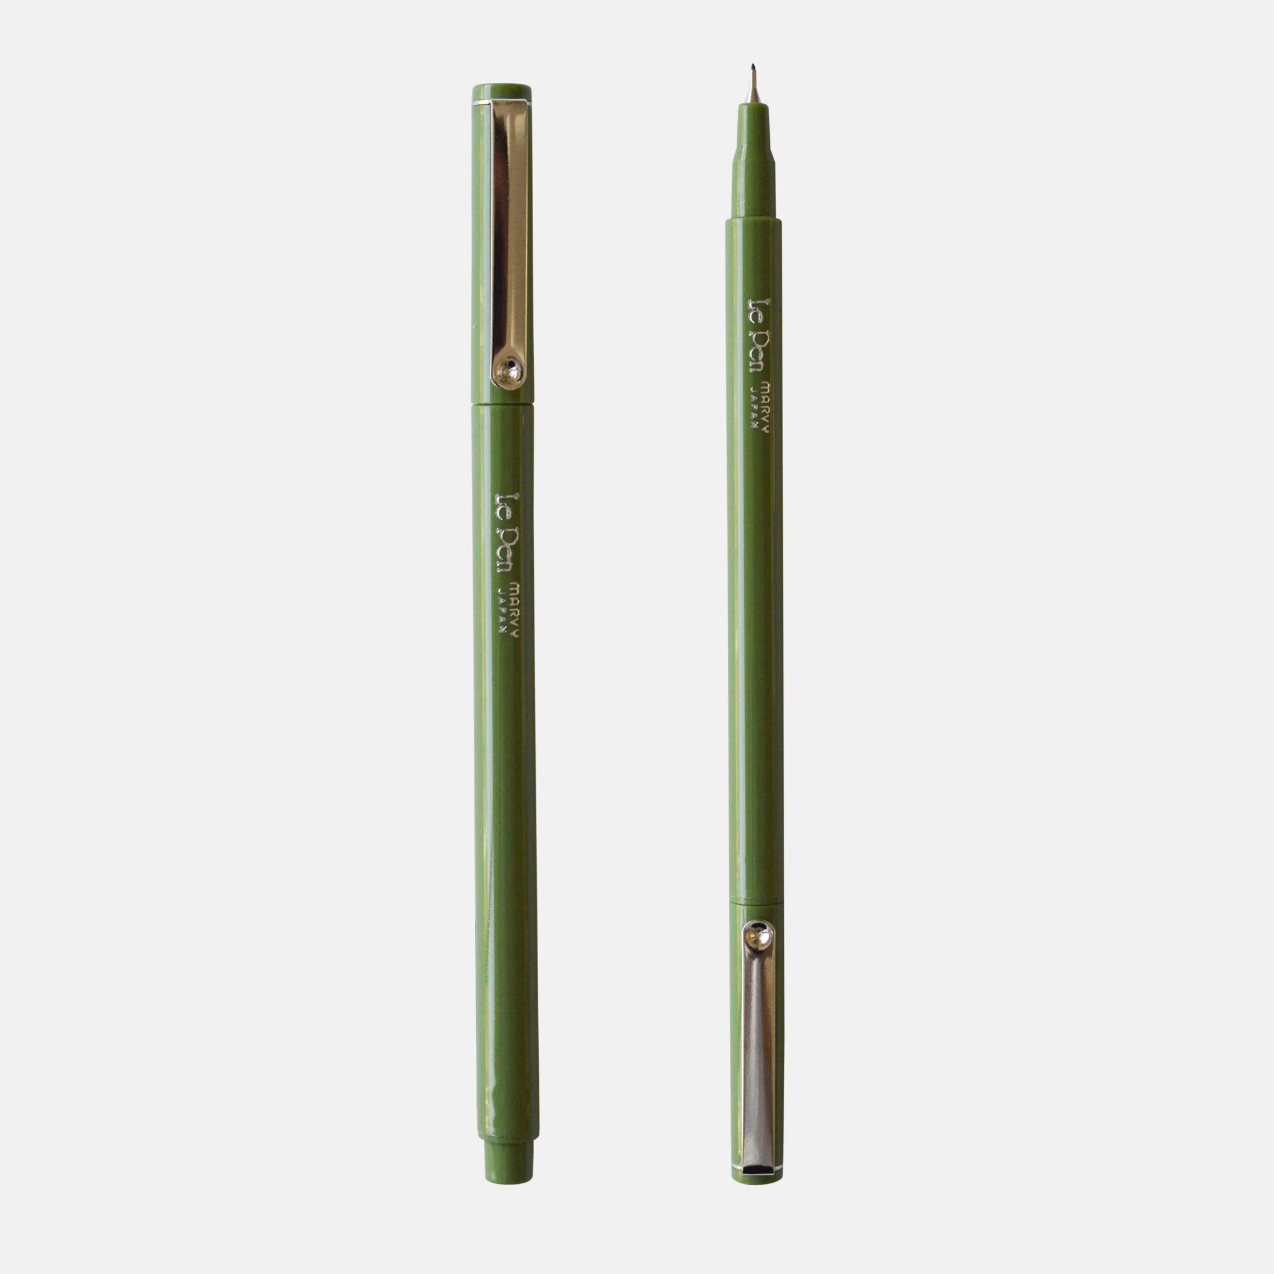 Two olive green pens, one with the cap on and one with the cap off.